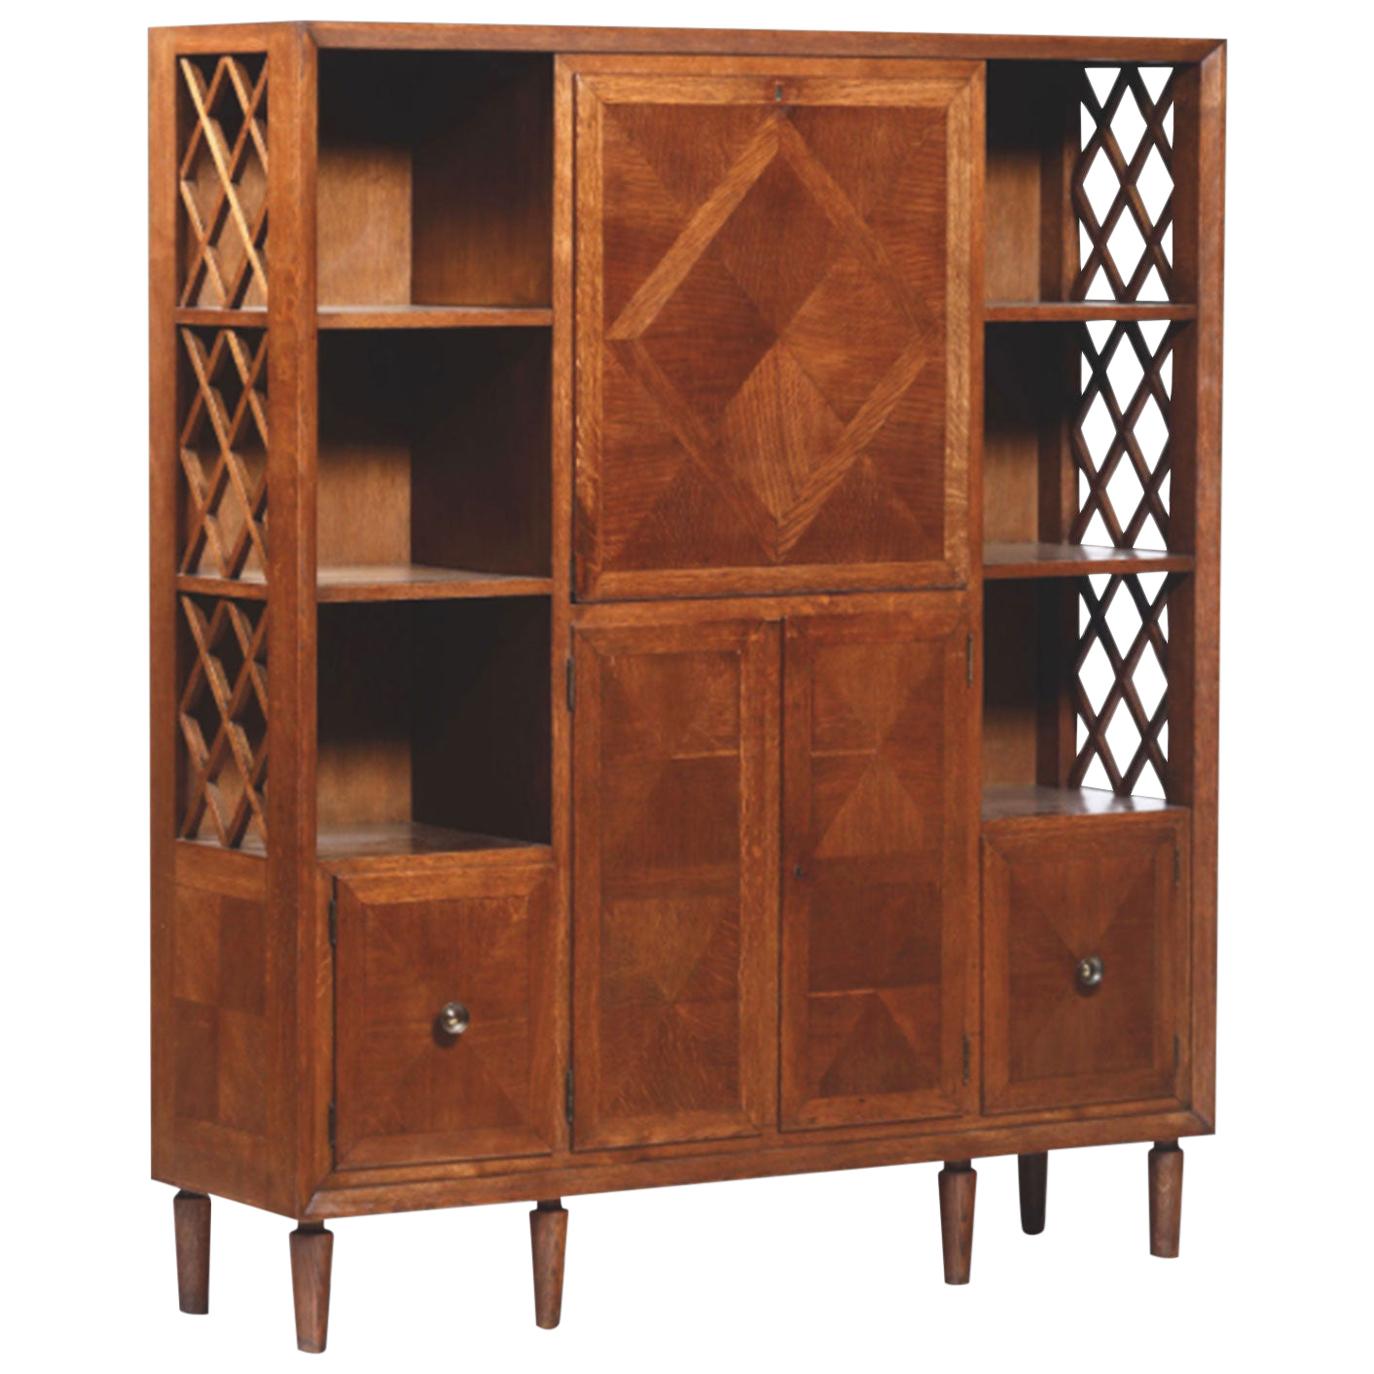 Midcentury Cabinet Arttributed to E. Lanzia, Italy, circa 1940s For Sale